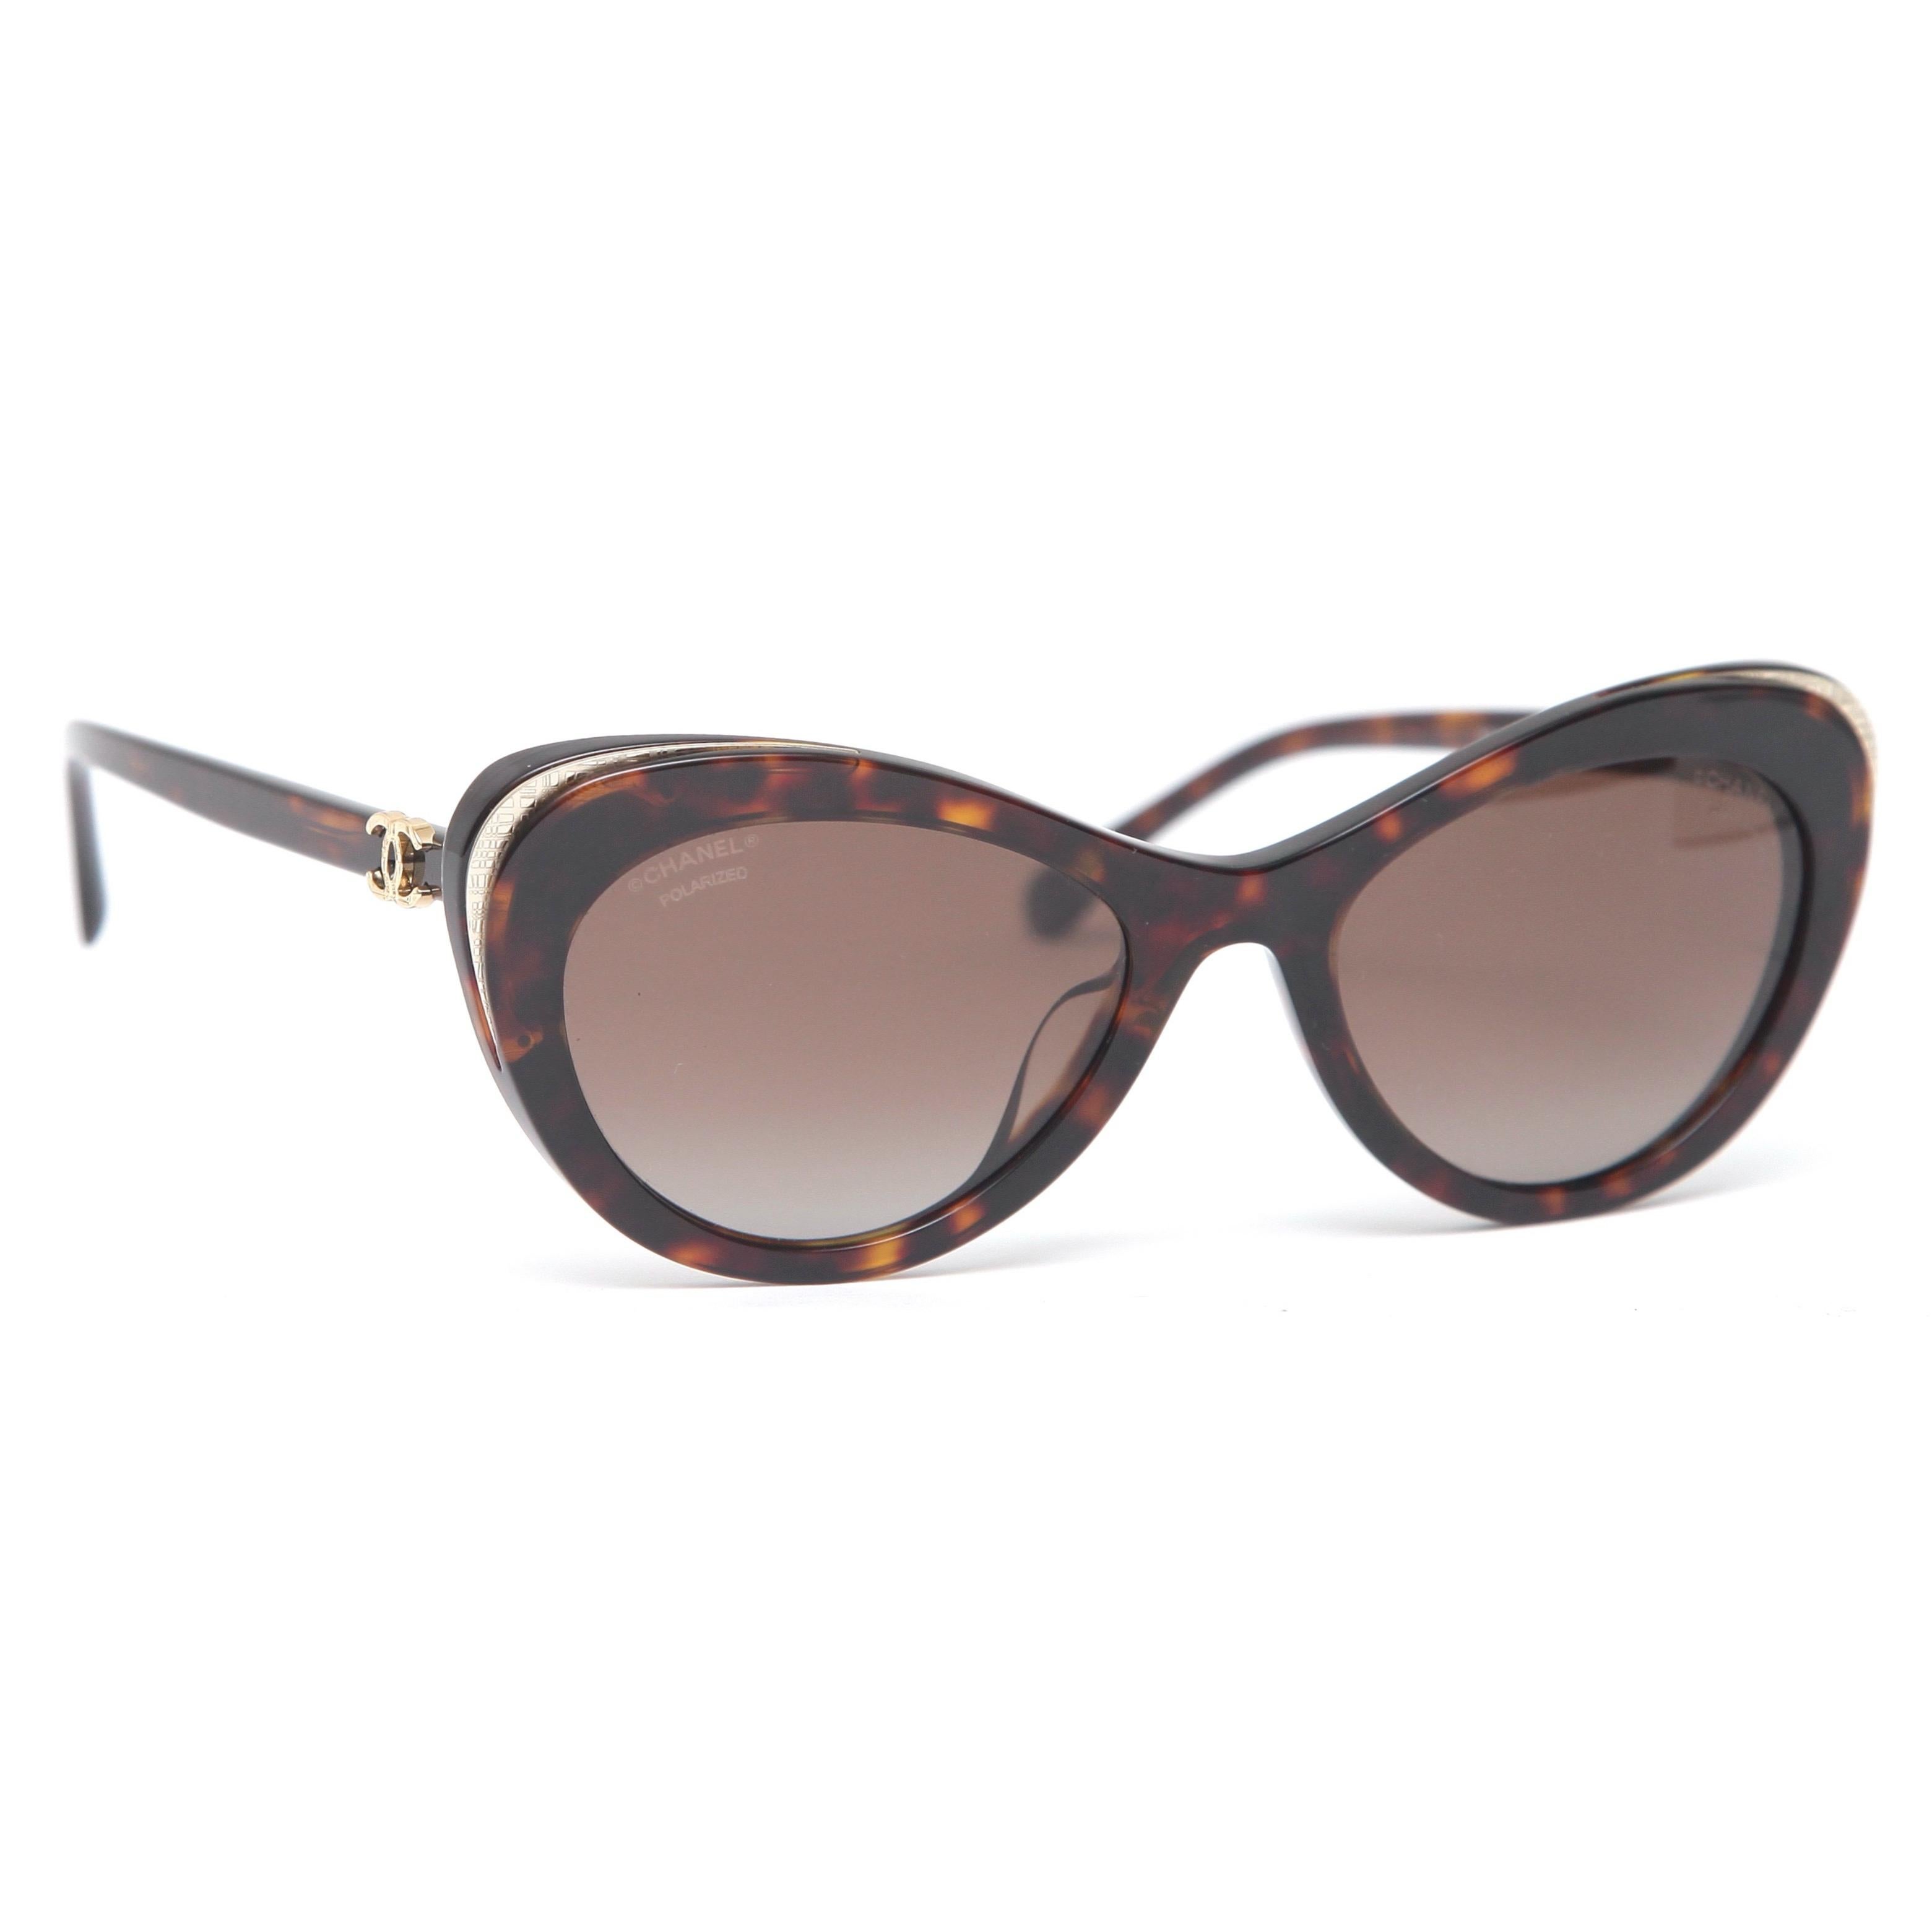 GUARANTEED AUTHENTIC CHANEL TORTOISE CAT EYE SUNGLASSES

5432-A 714/S9 54-19 140

Details: 
- Brown tortoise cat eye shaped acetate frames.
- Gold-tone accent at corners.
- Polarized lenses.
- CC at each hinge.
- Comes with original Chanel